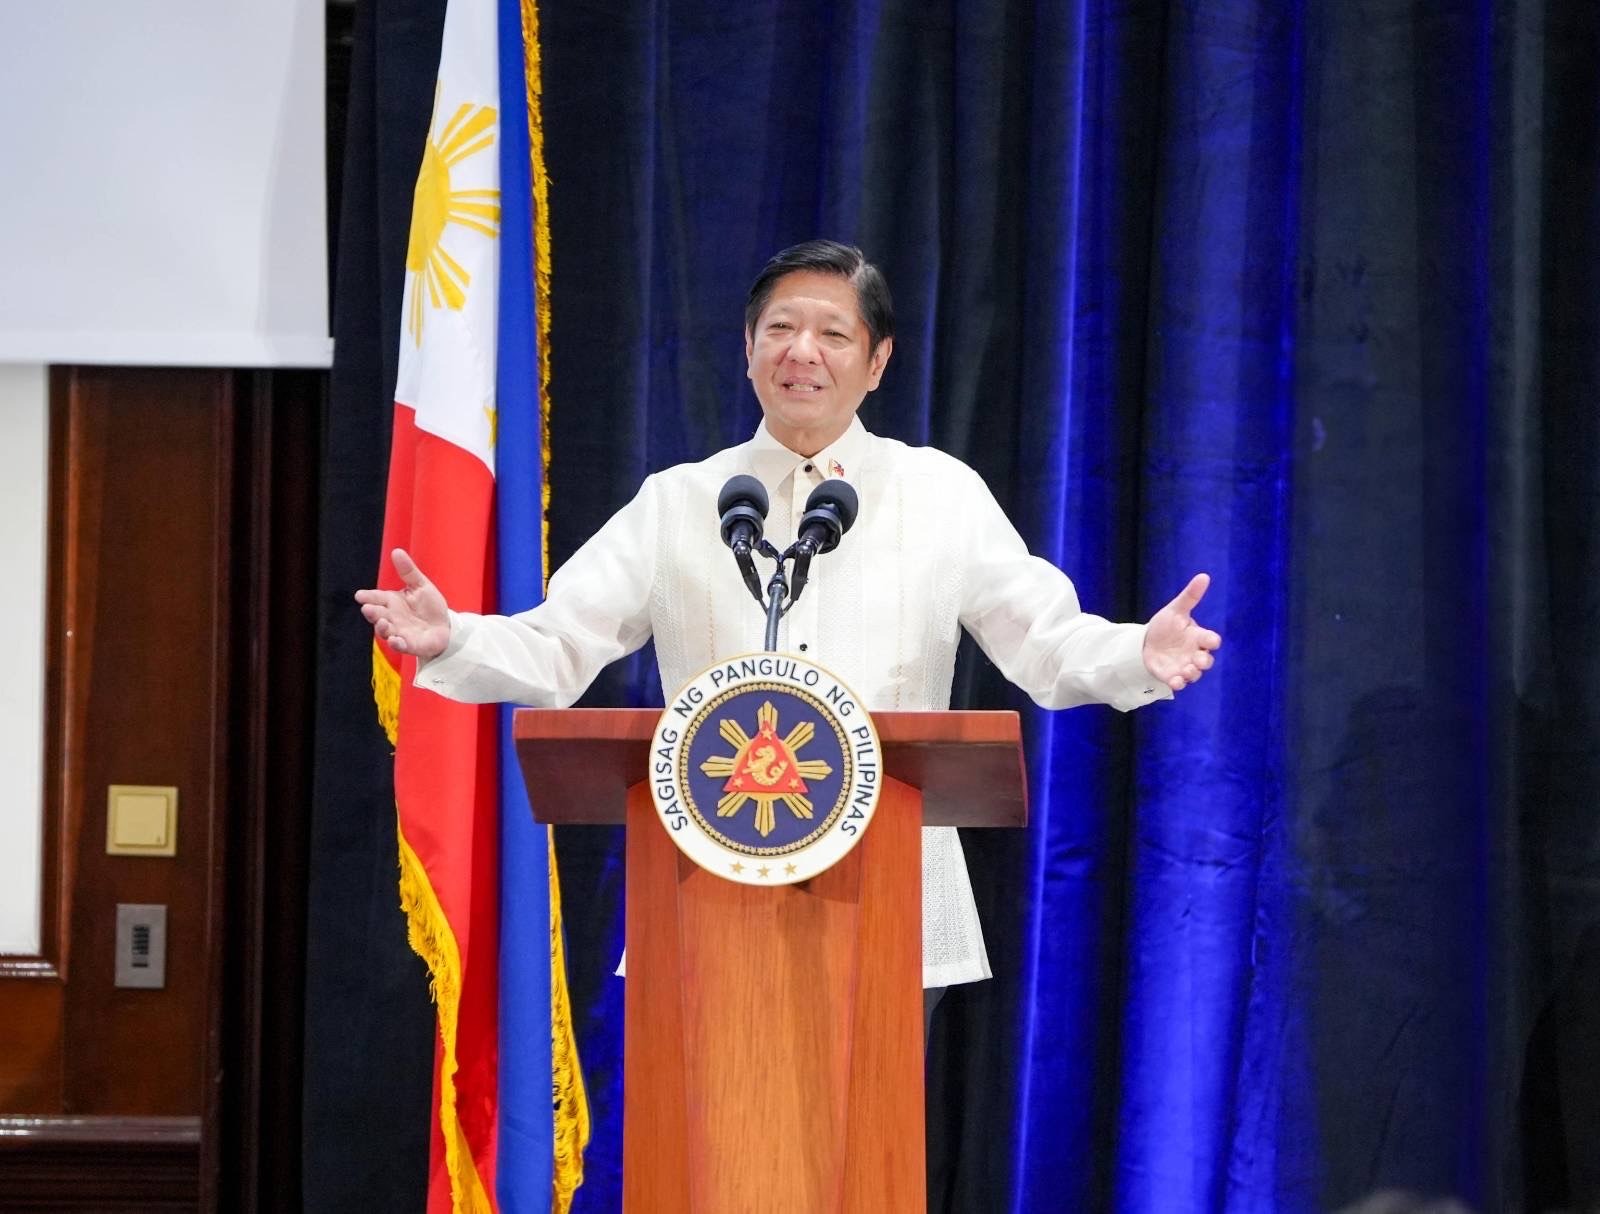 President Ferdinand Marcos, Jr. in Germany for the Philippine-German Business Forum